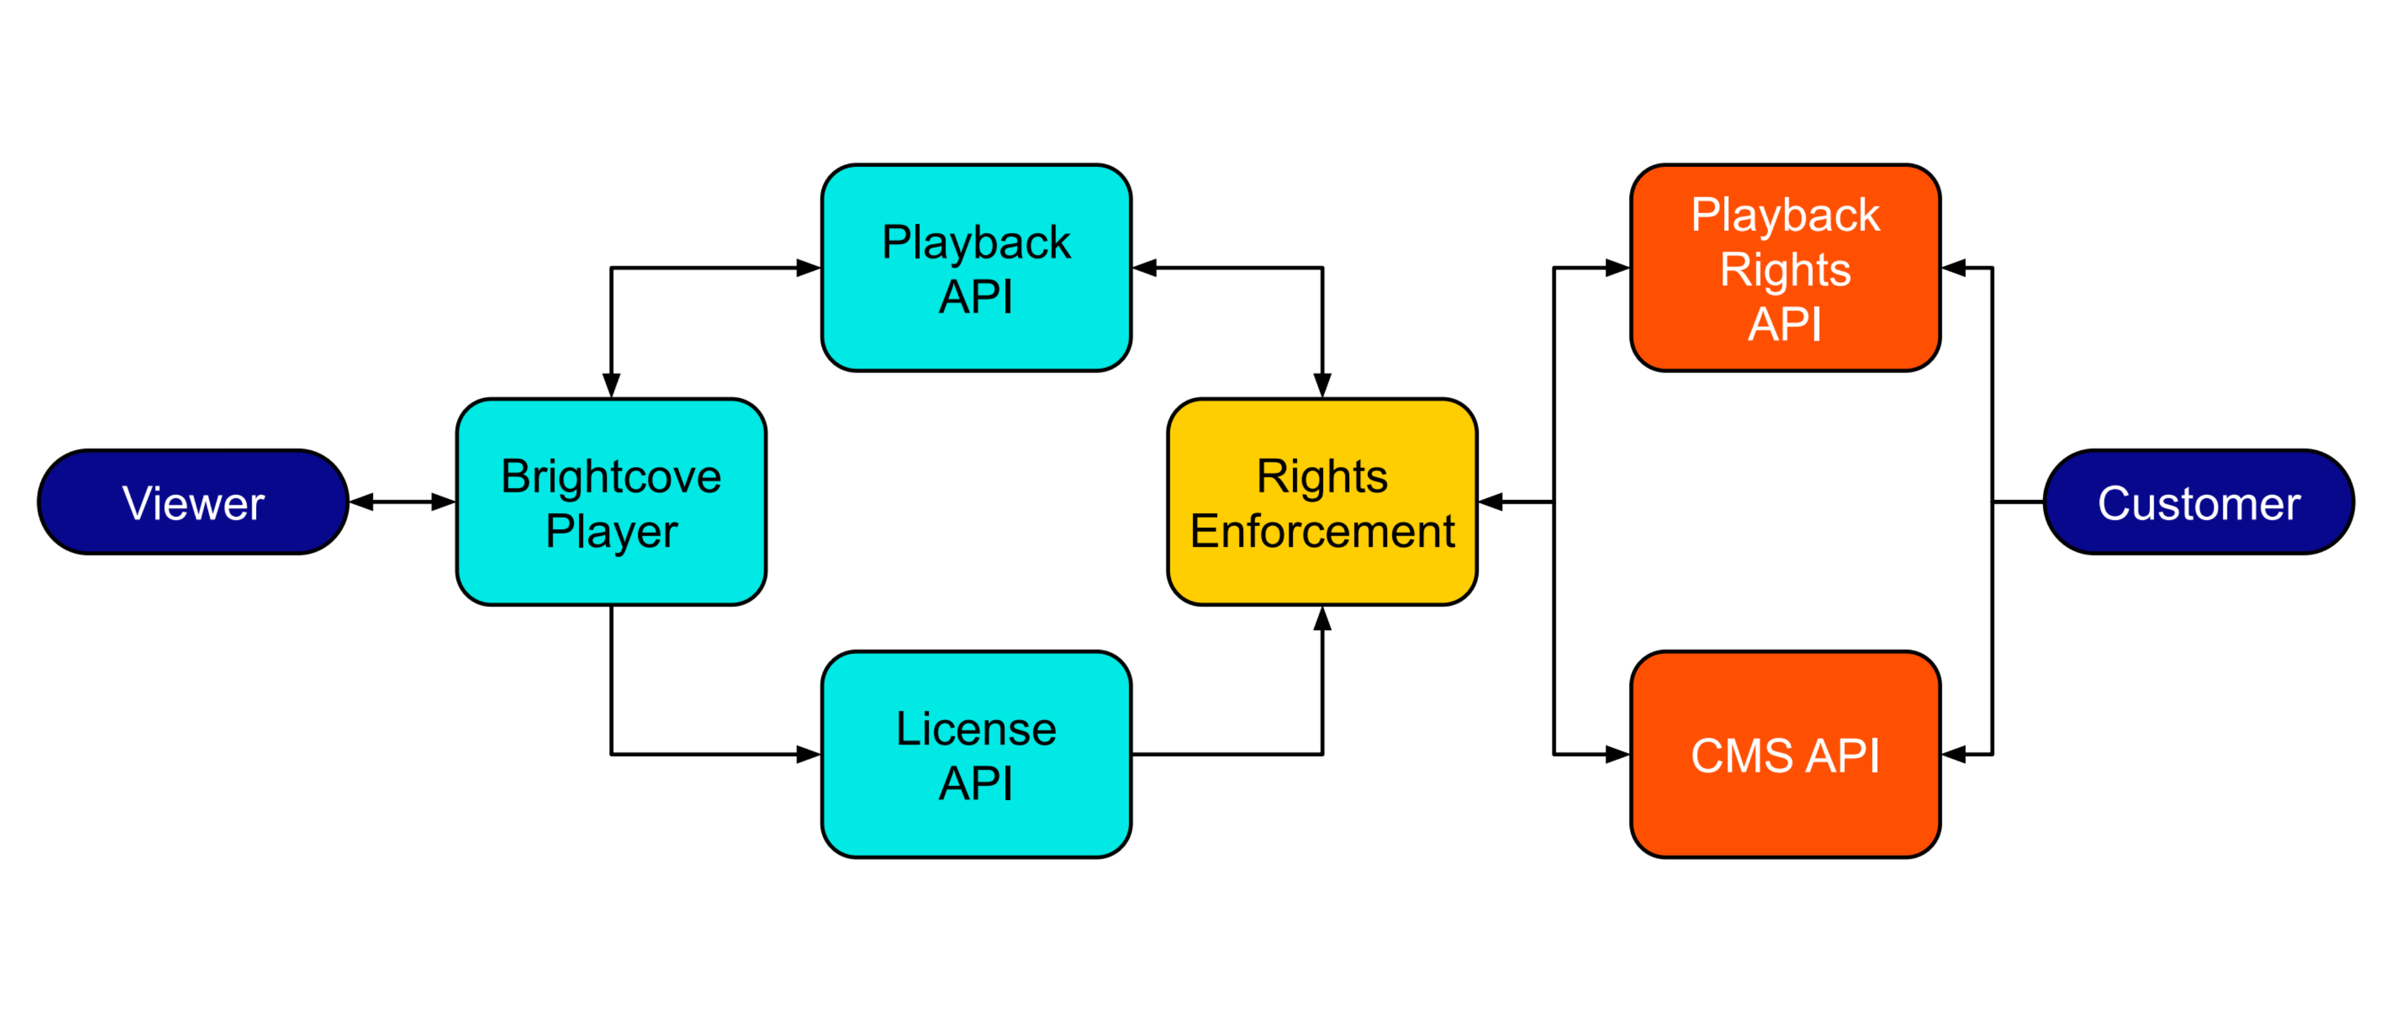 Playback Rights Management Service